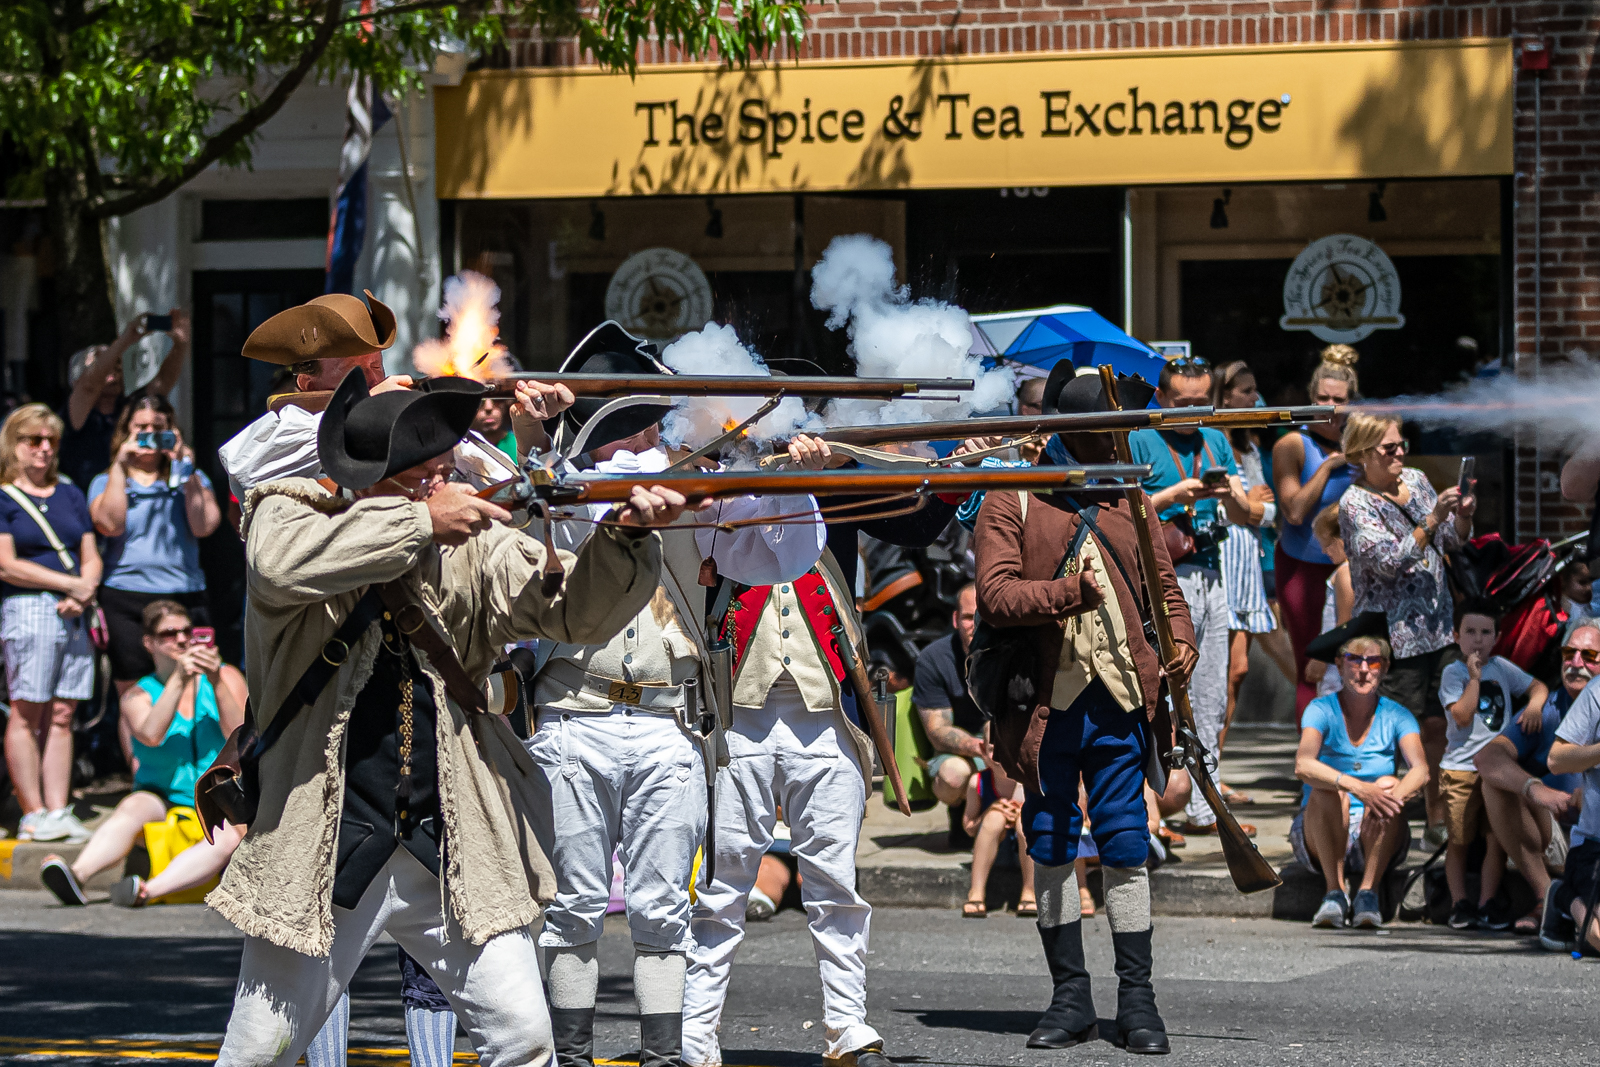 Muskets being fired outside the Tea Exchange